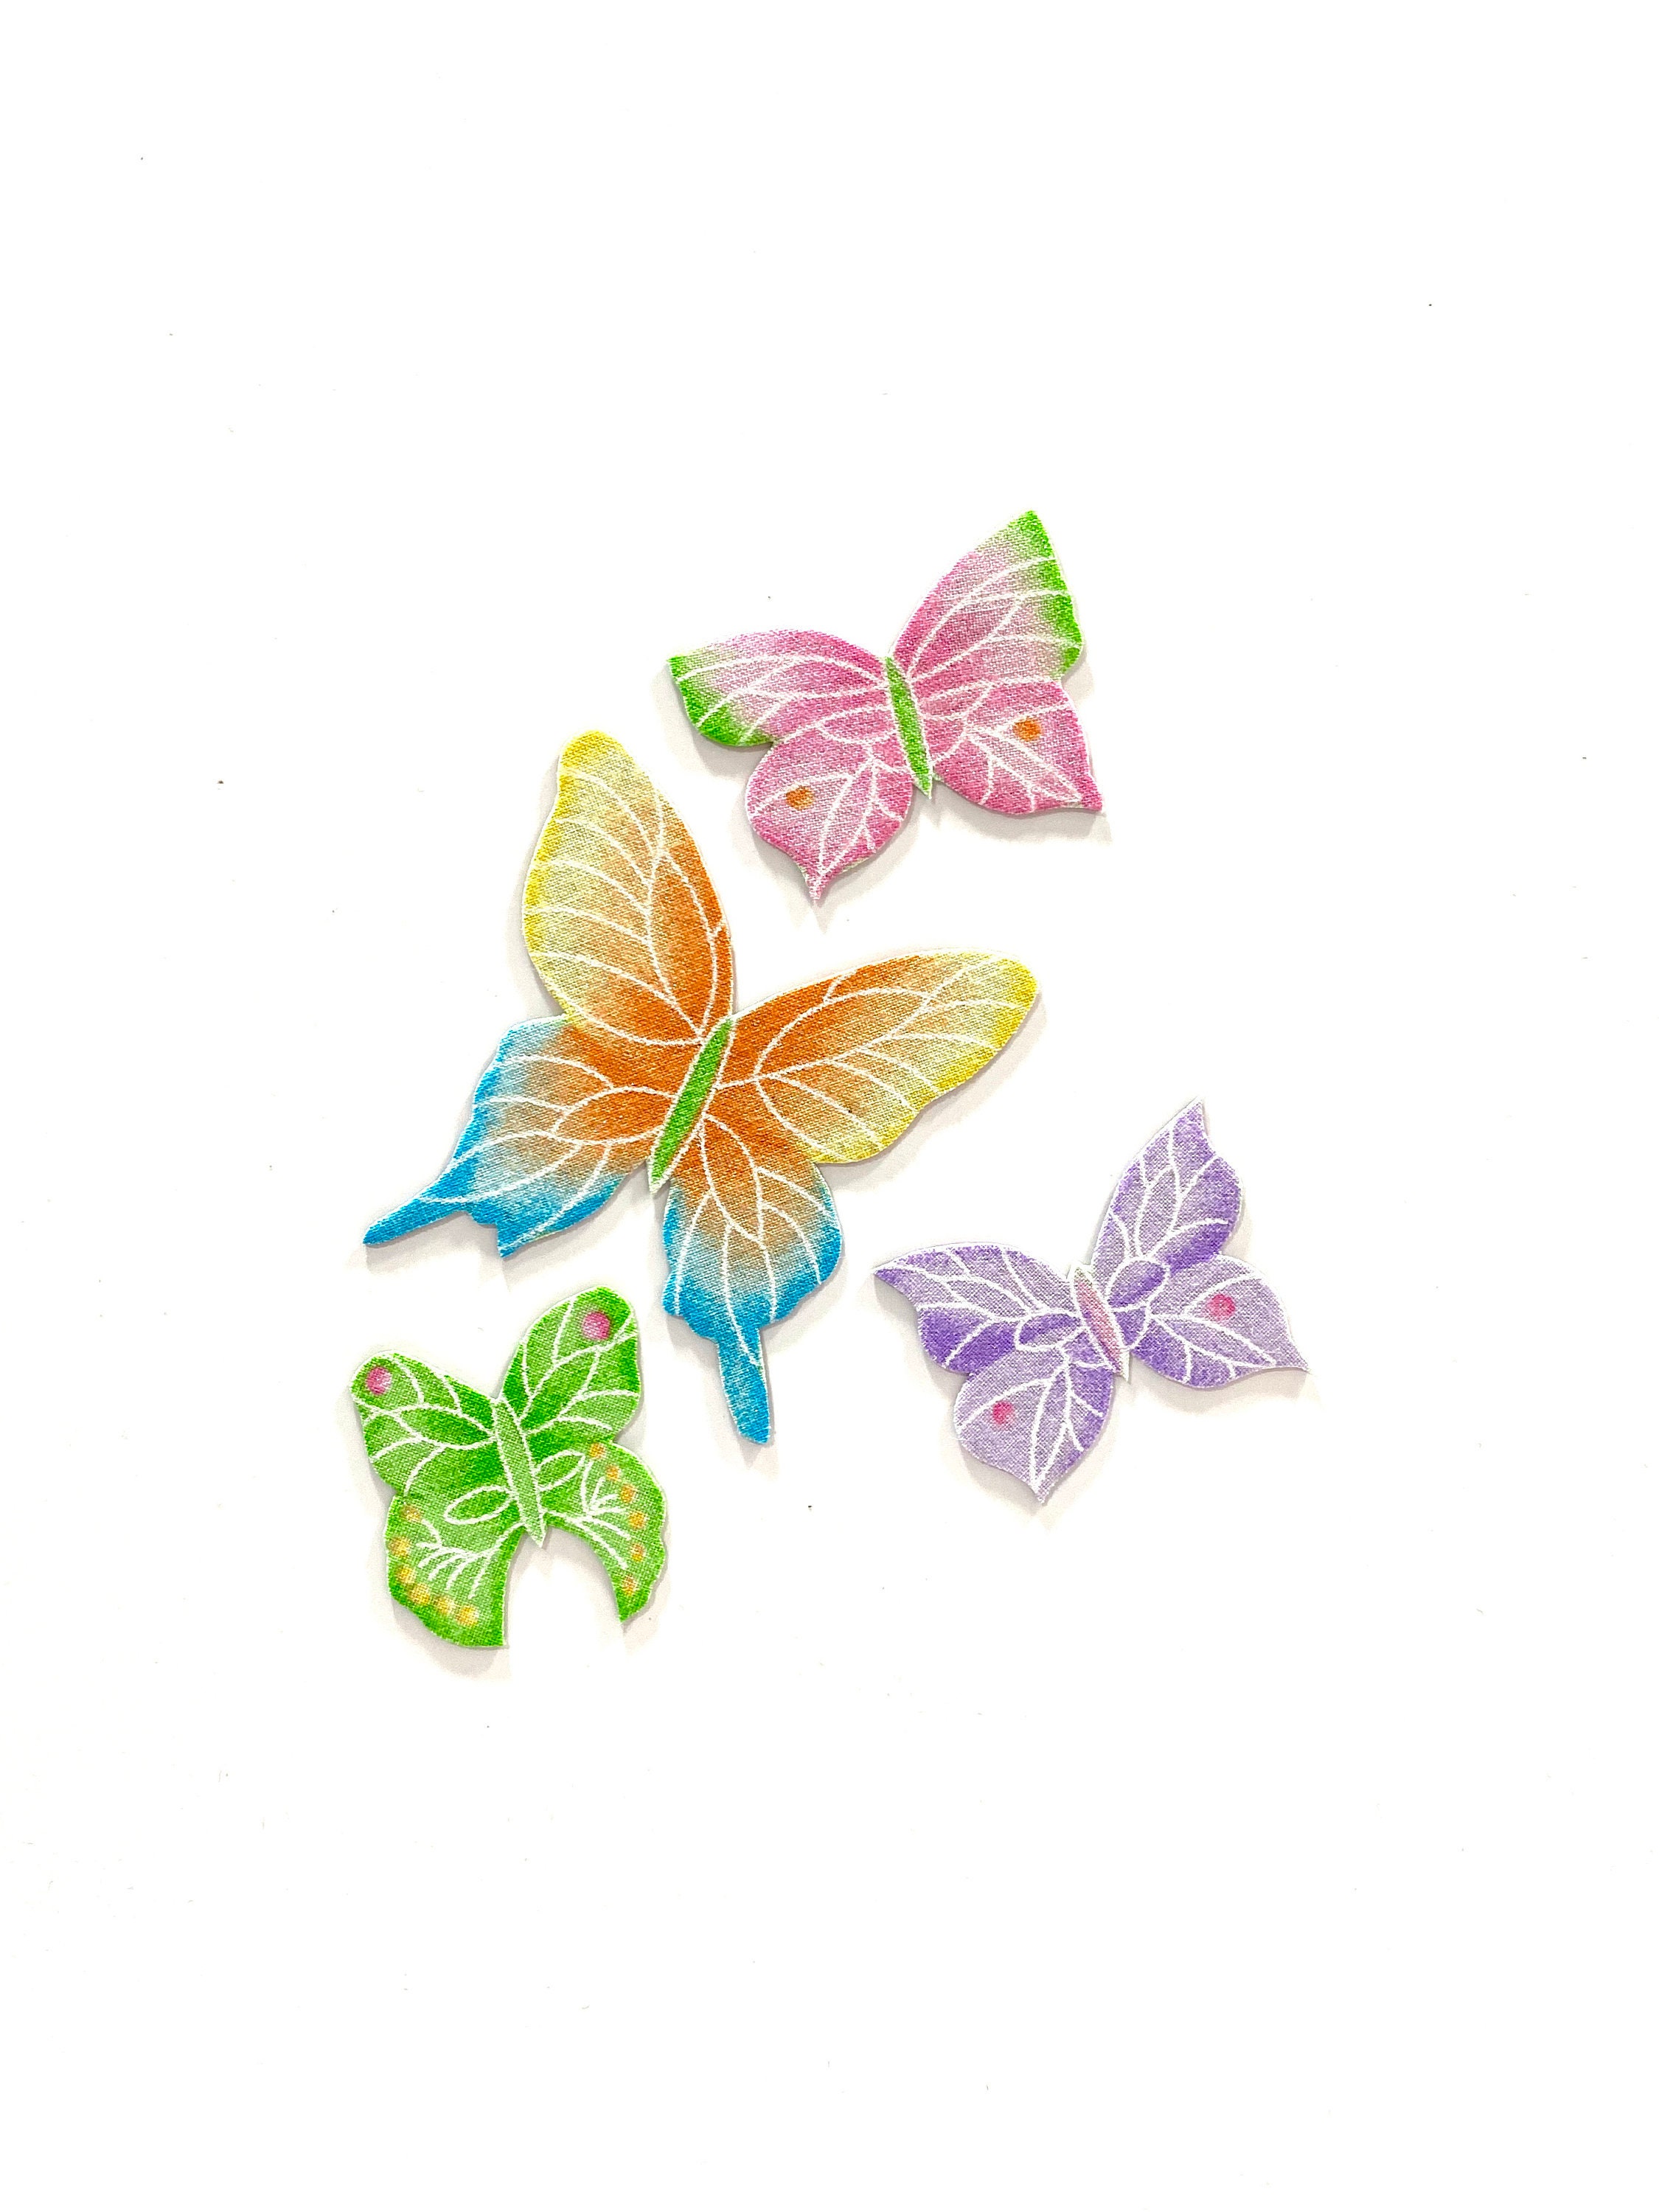 Butterfly Magnets set of 4 Butterfly Decor Colorful - Etsy